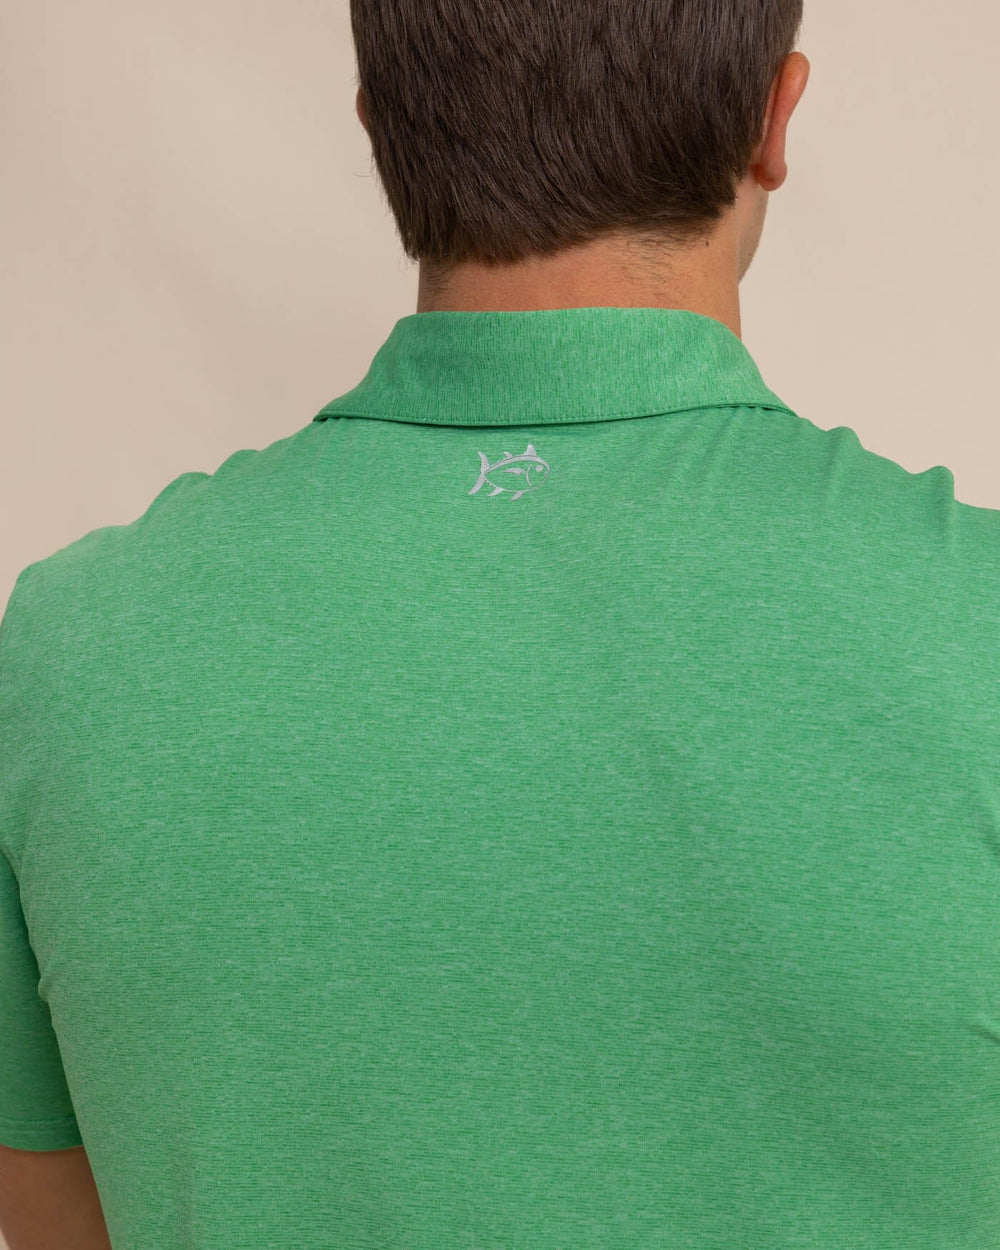 The detail view of the Southern Tide brrr-eeze-heather-performance-polo-shirt by Southern Tide - Heather Kelly Green